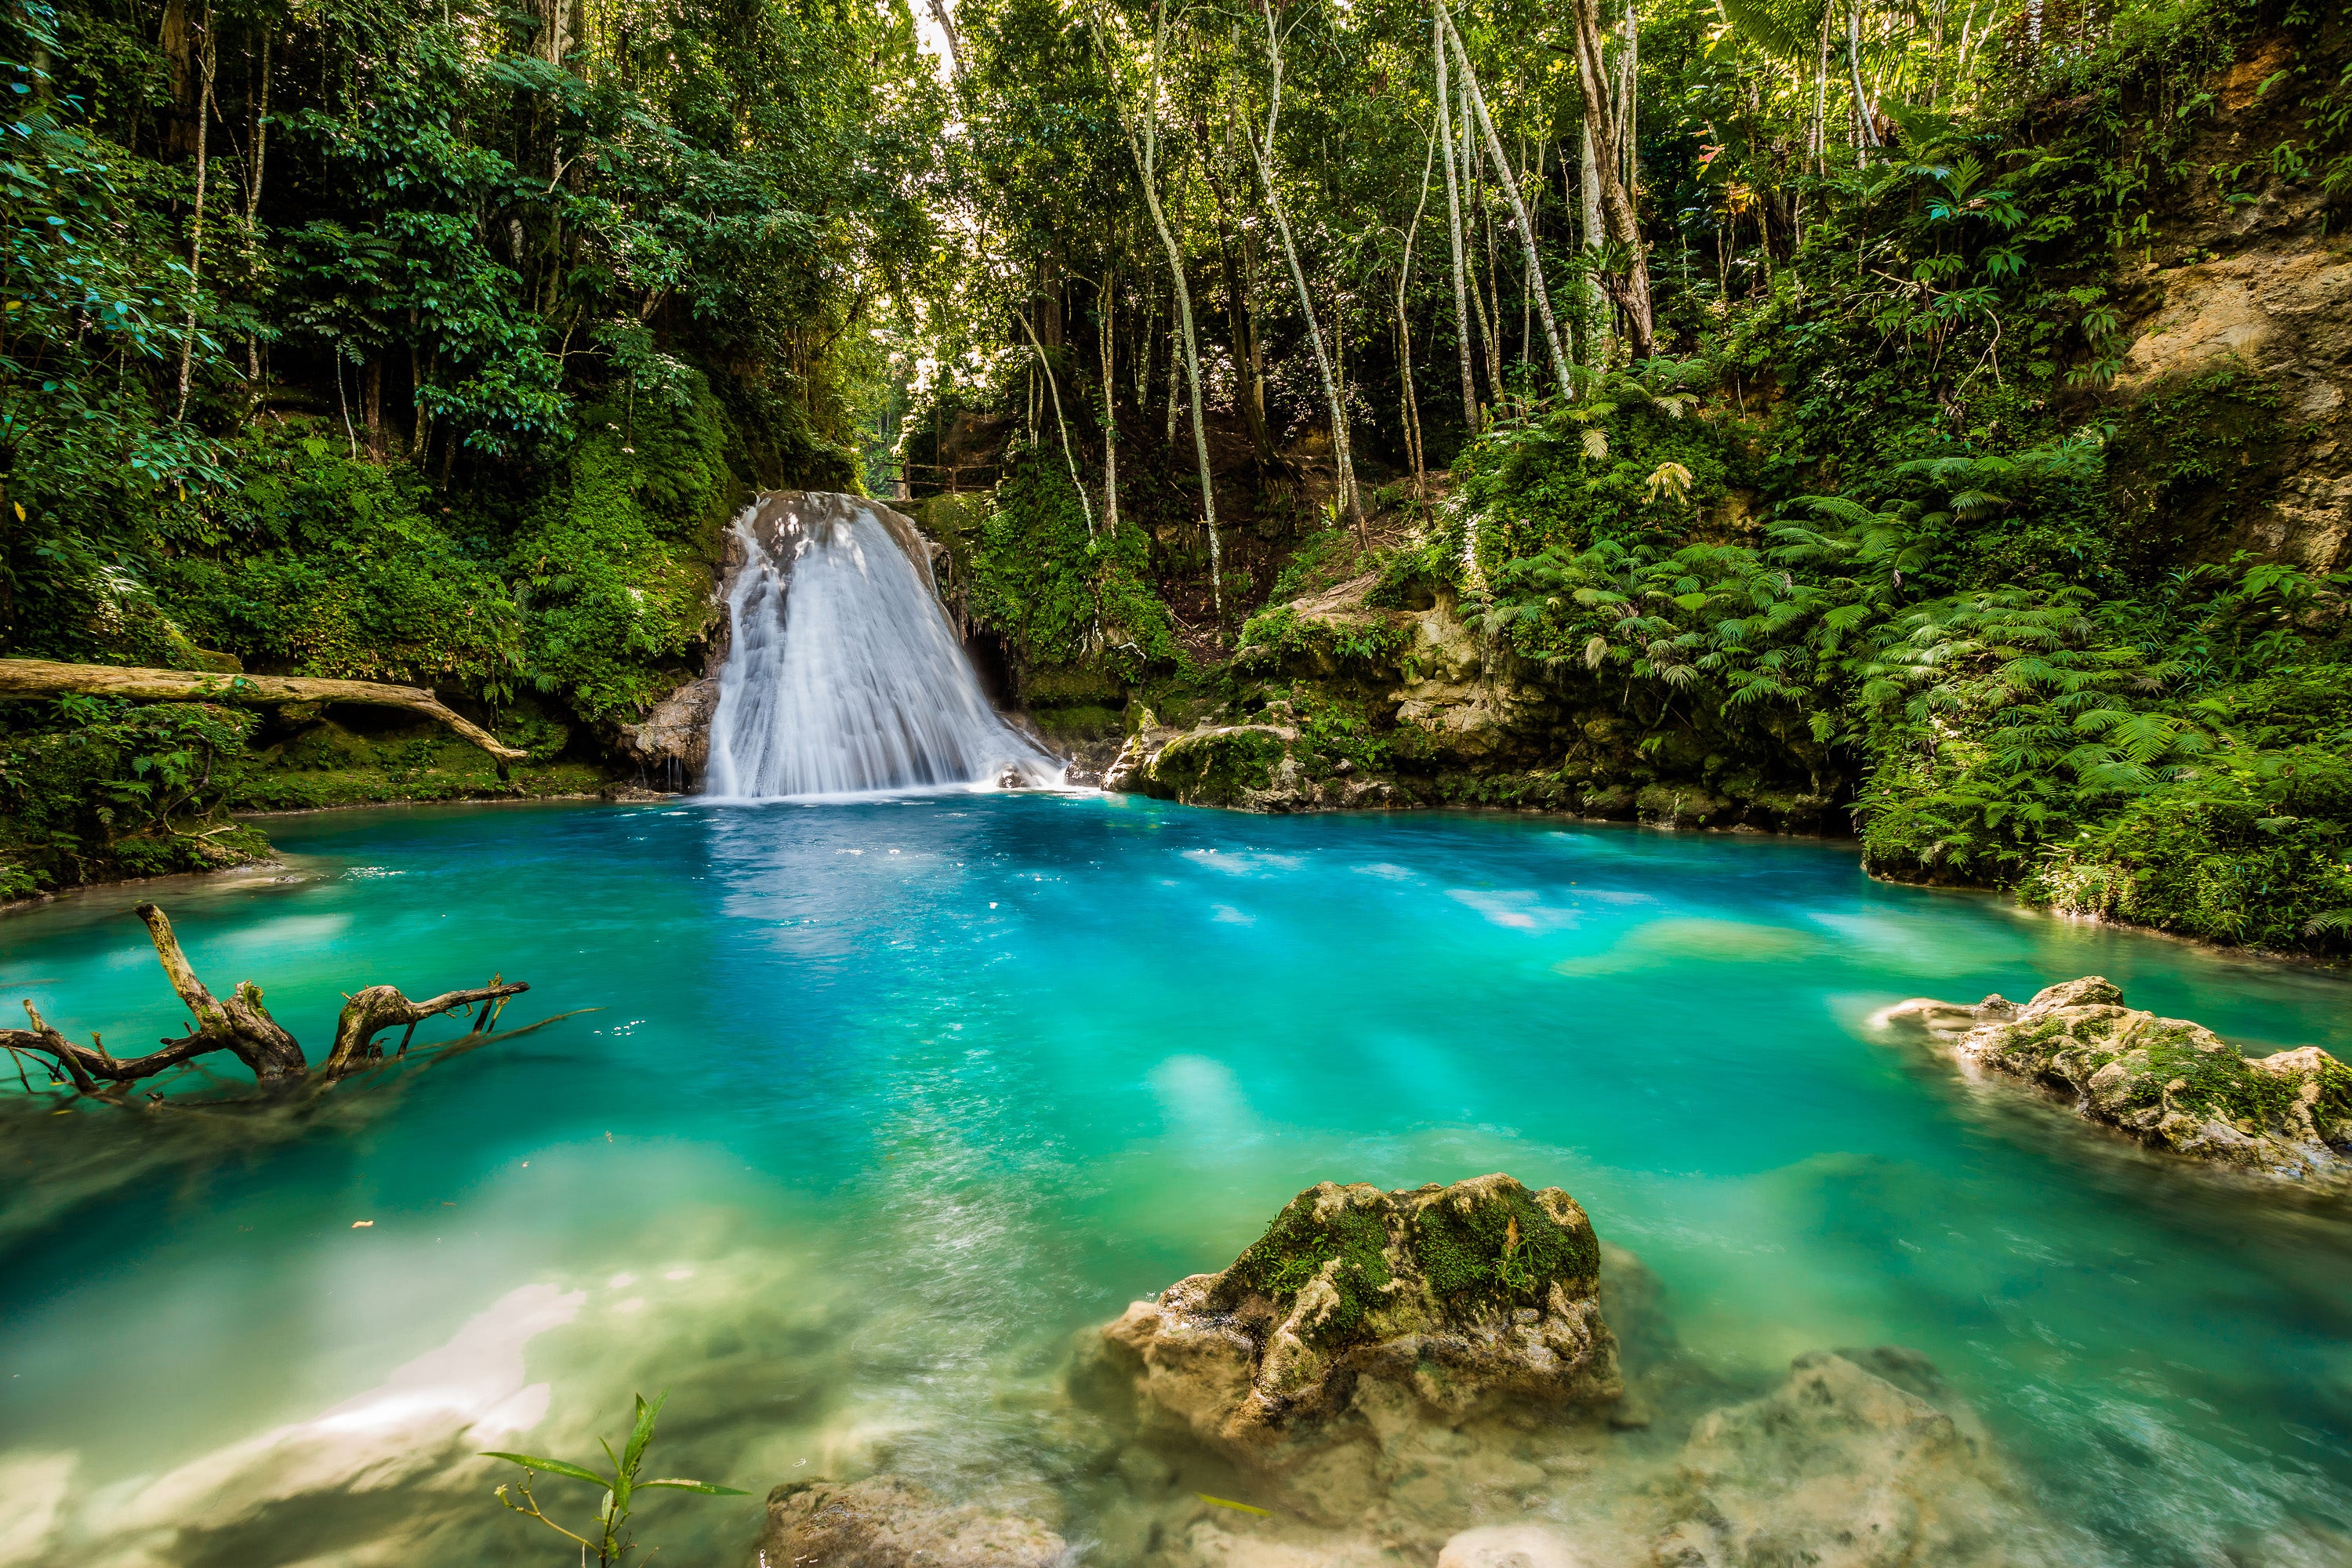 Blue Hole mineral springs in Jamaica